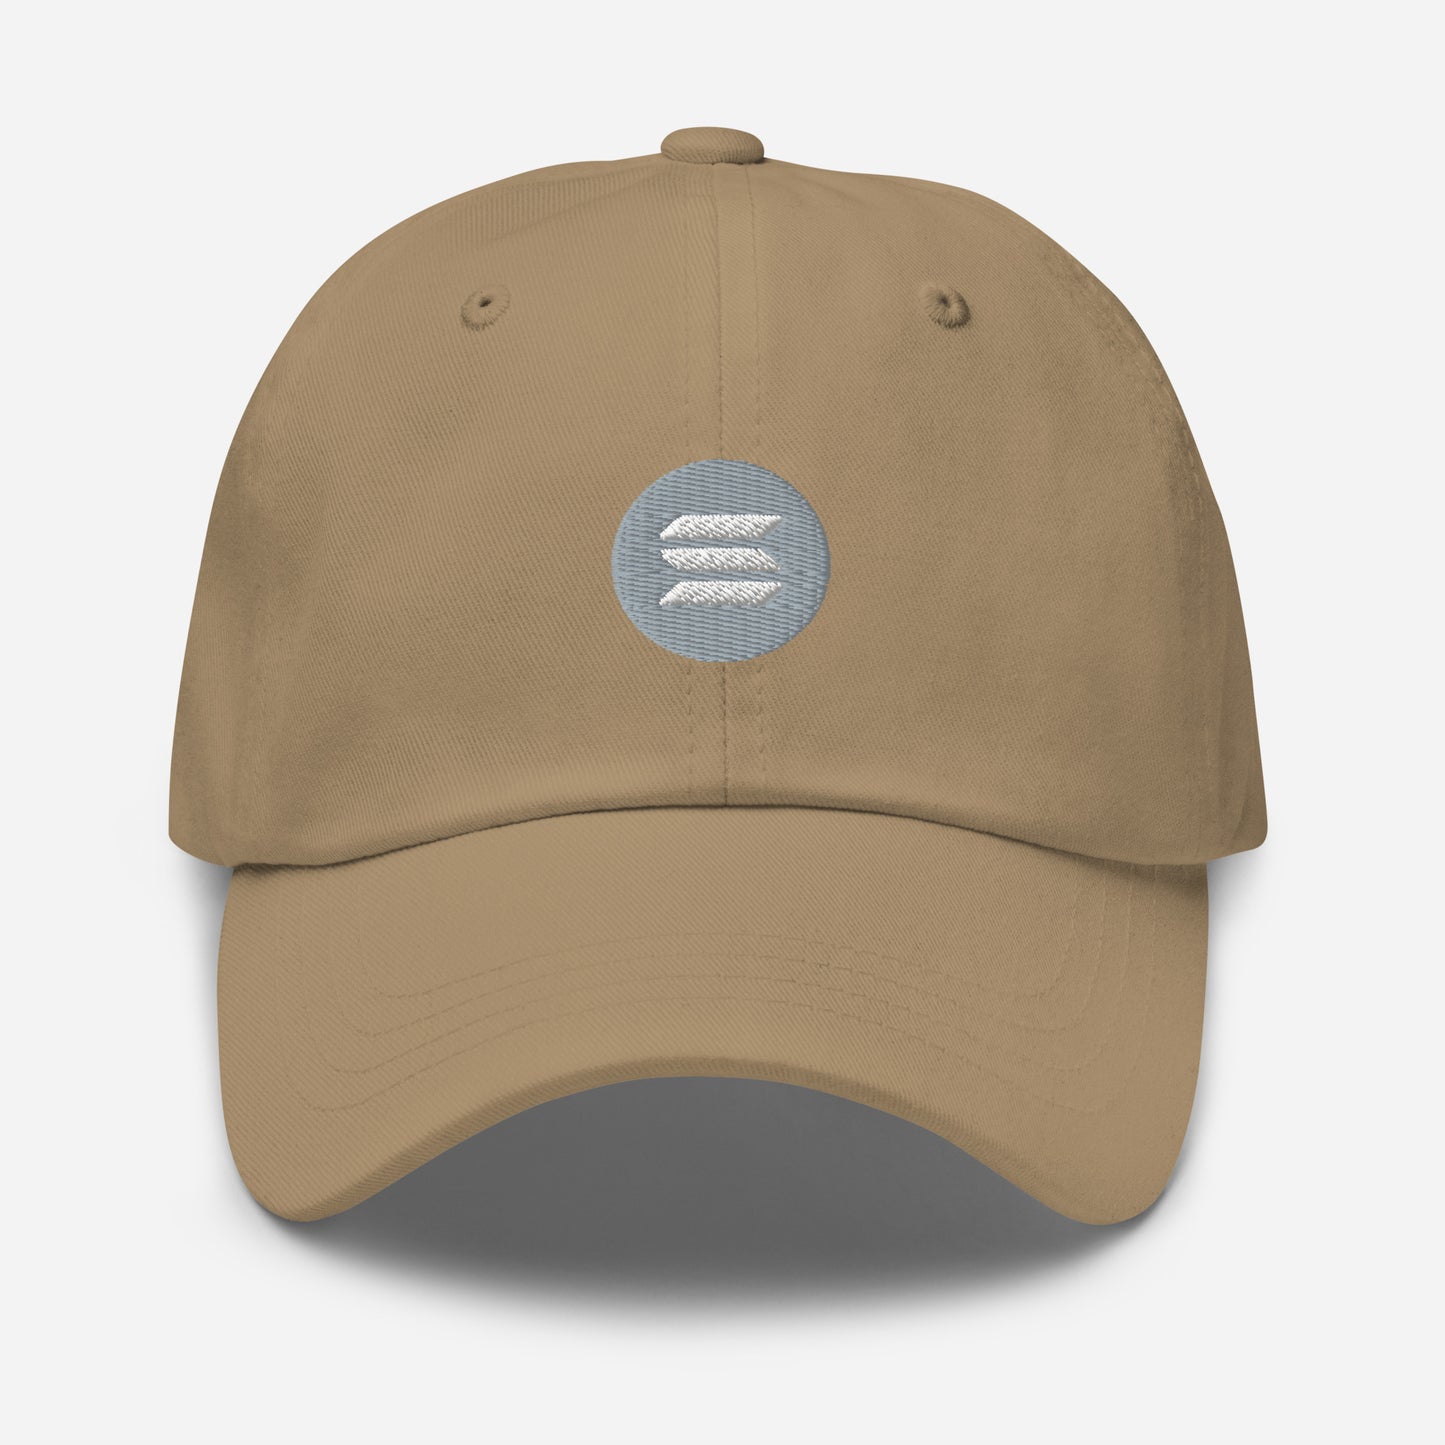 SOLANA (SOL) - Fitted baseball cap